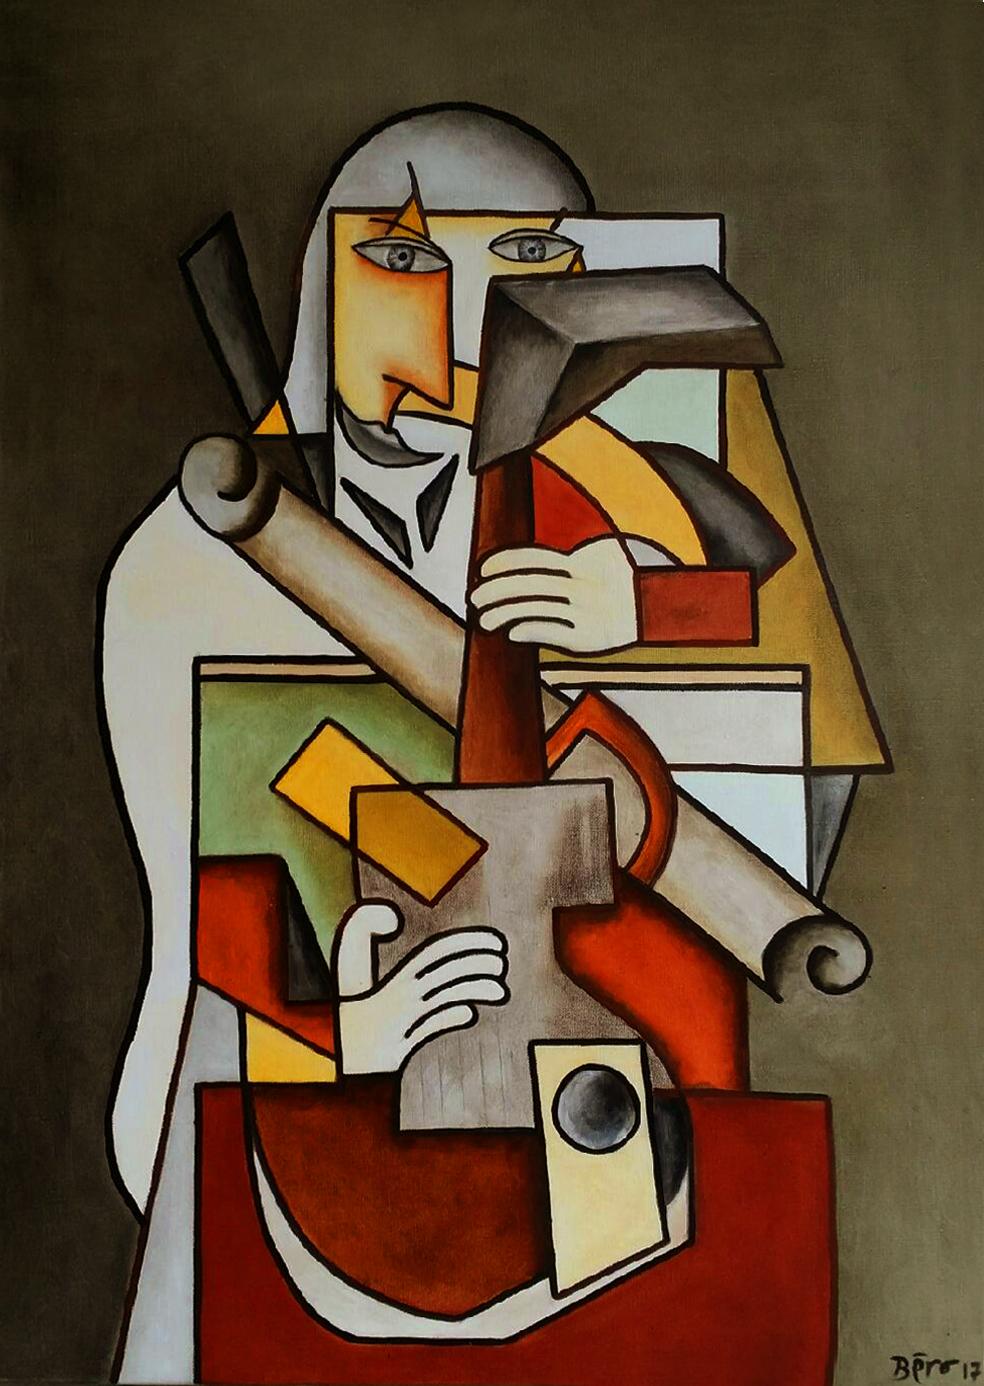 Destructuration by Alain Beraud, Cubism oil painting, Contemporary Art, 2018 